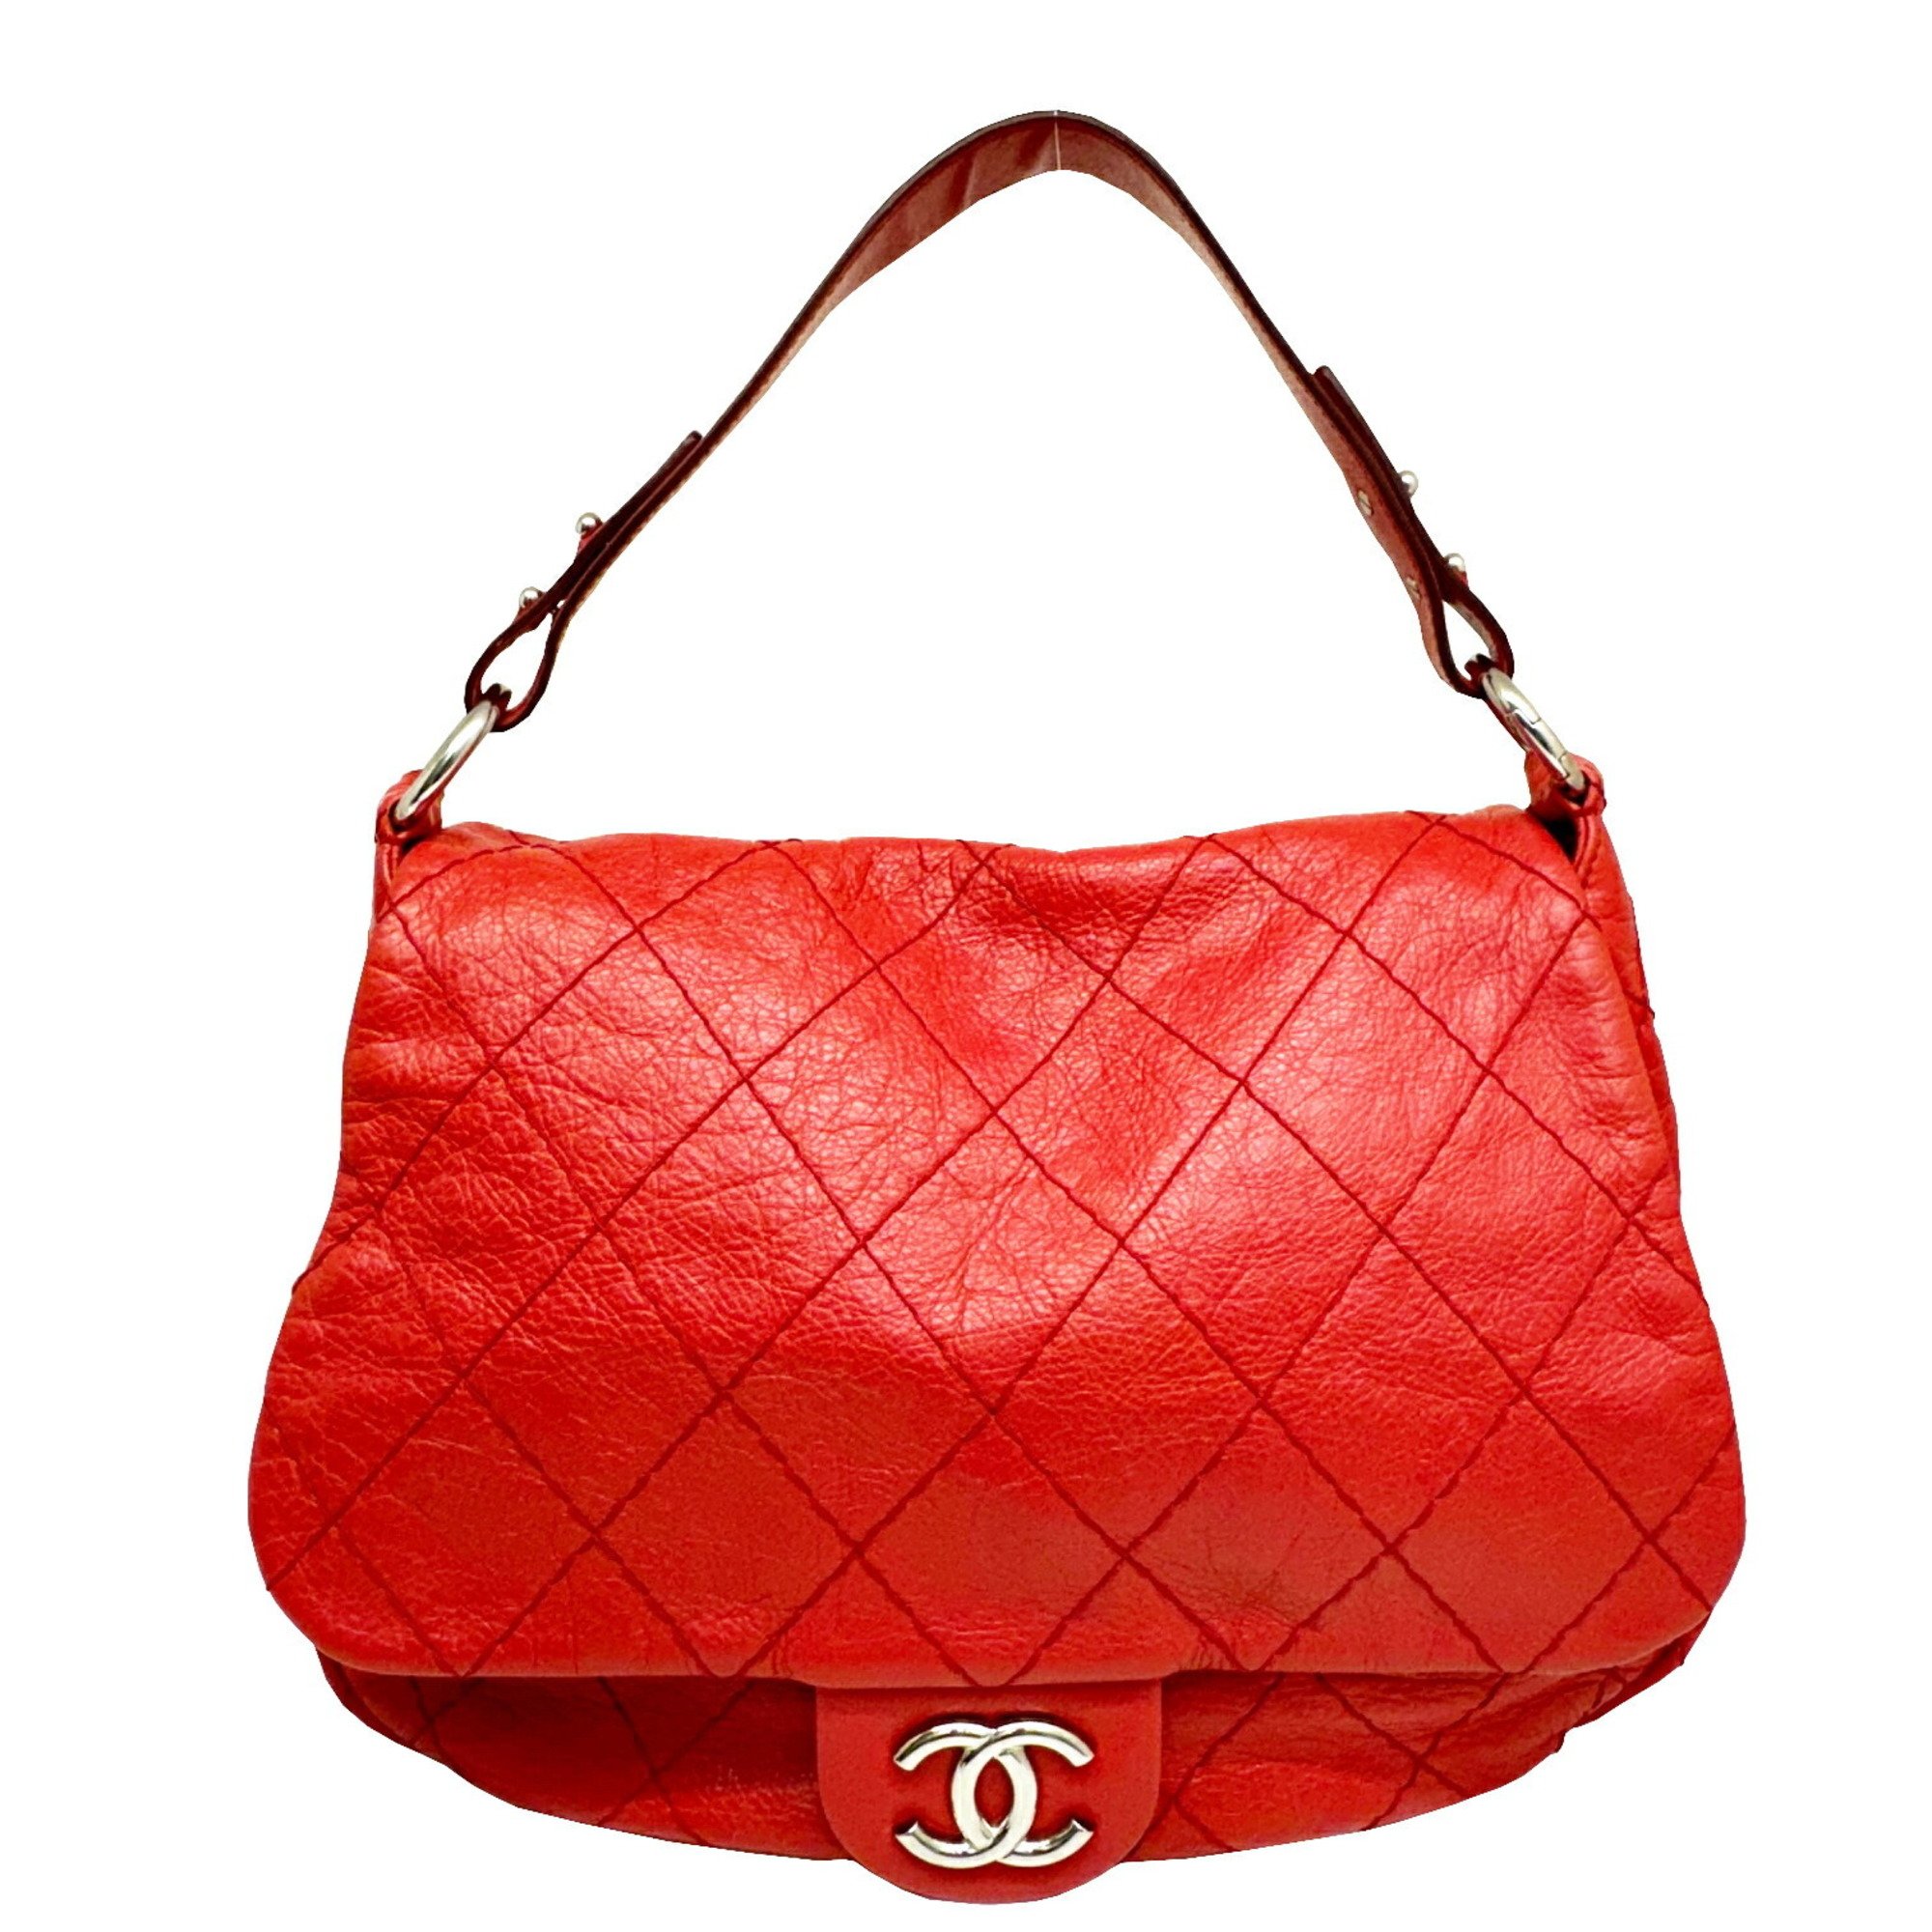 CHANEL Coco Mark Matelasse Shoulder Bag Leather Red 13 Series Women's